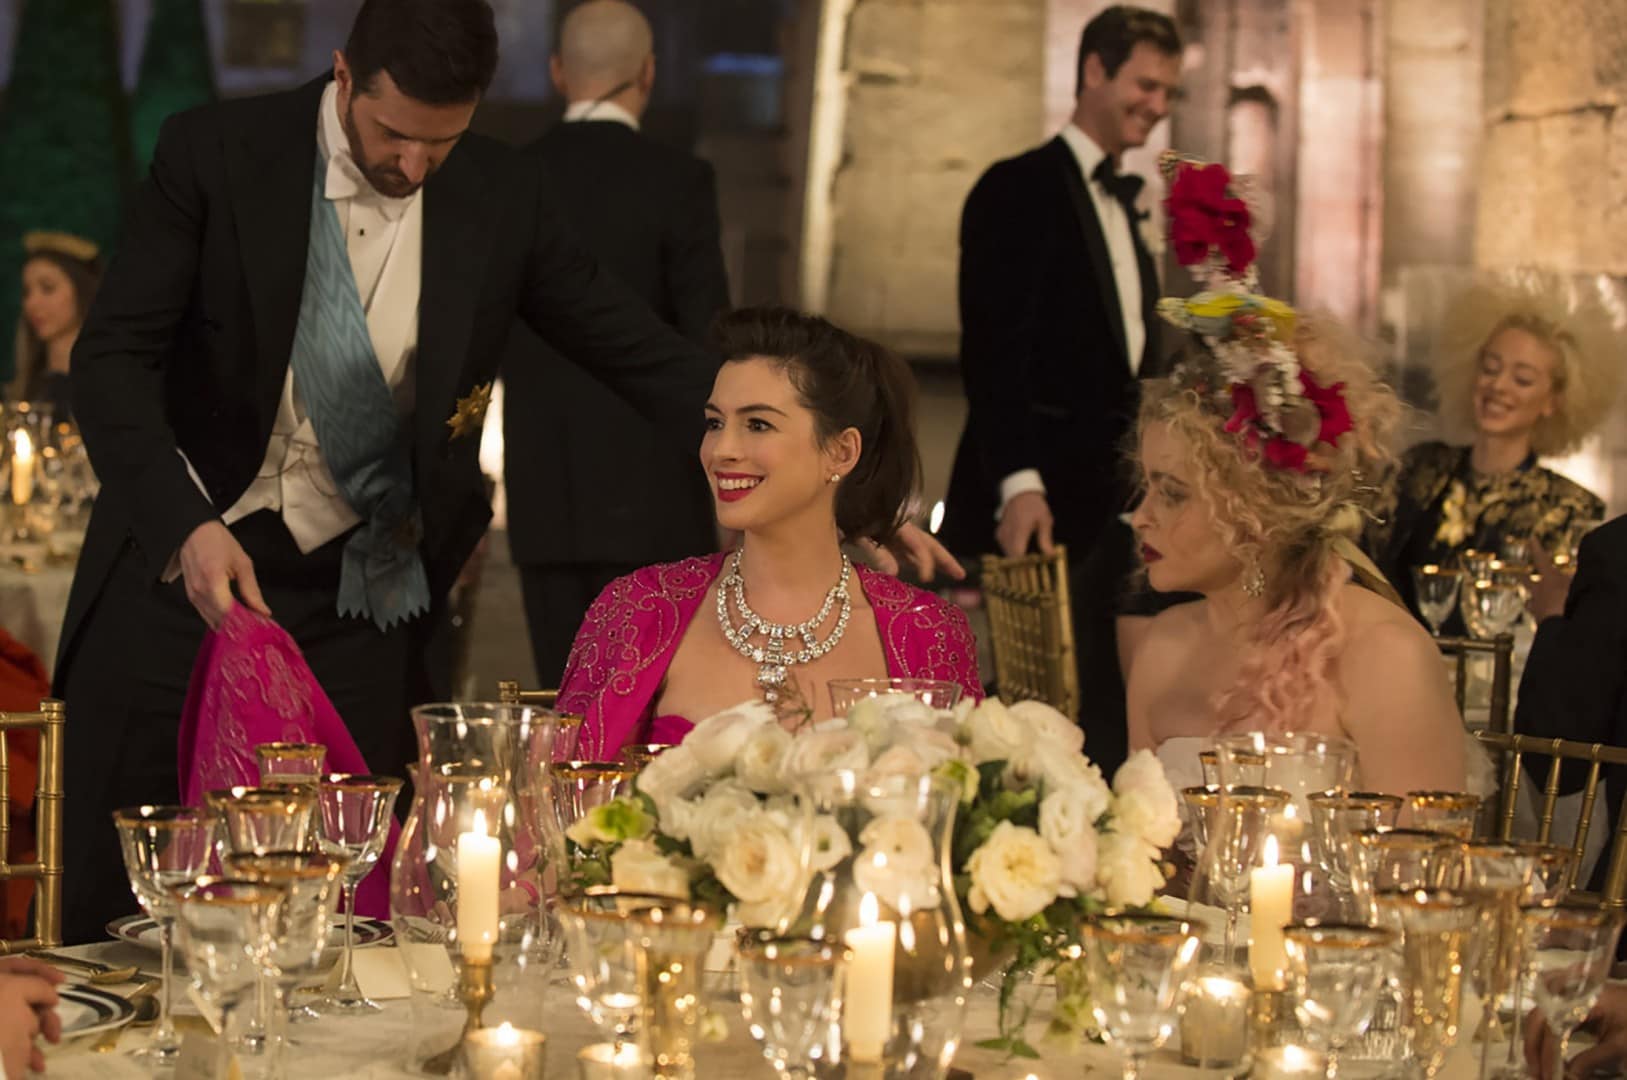 Anne Hathaway in Ocean’s 8 wearing a Cartier replica of the Nawanagar necklace